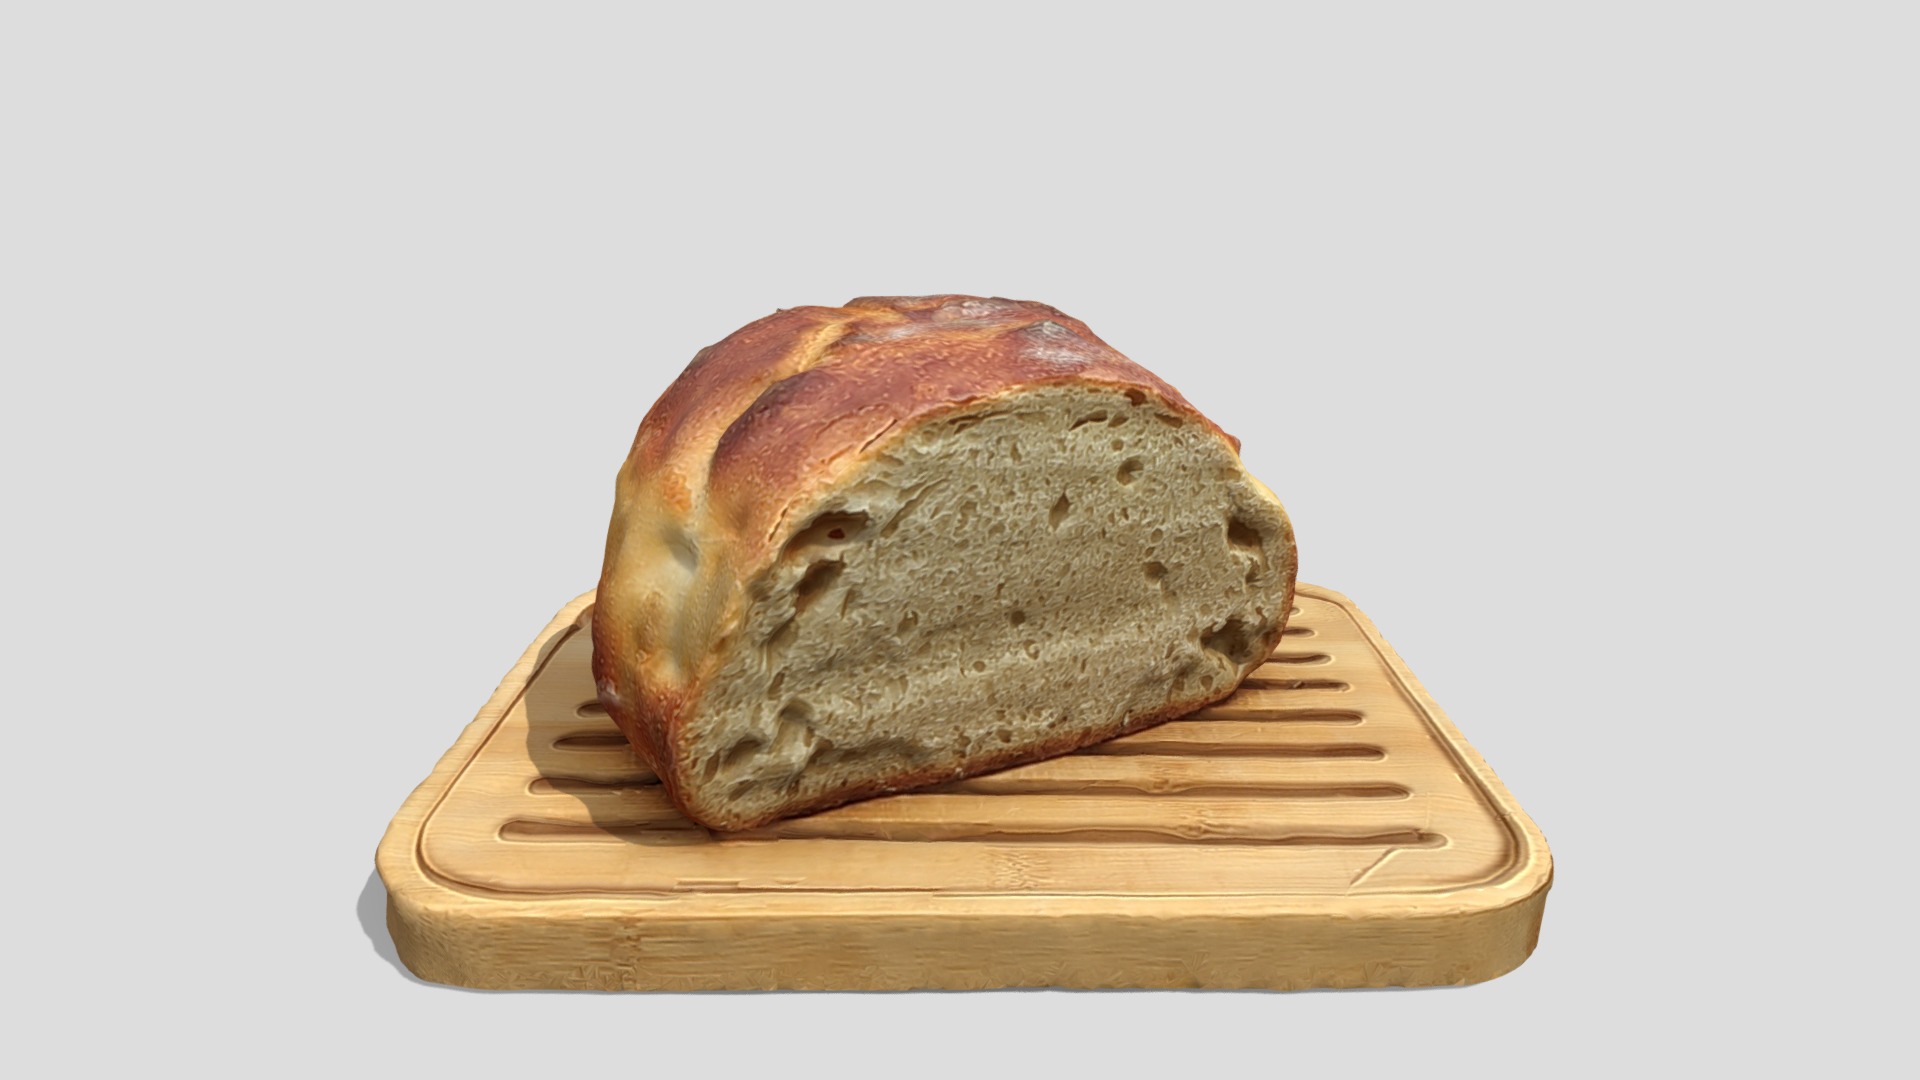 3D model Homemade bread on bamboo (April 2020) - This is a 3D model of the Homemade bread on bamboo (April 2020). The 3D model is about a loaf of bread on a wooden board.